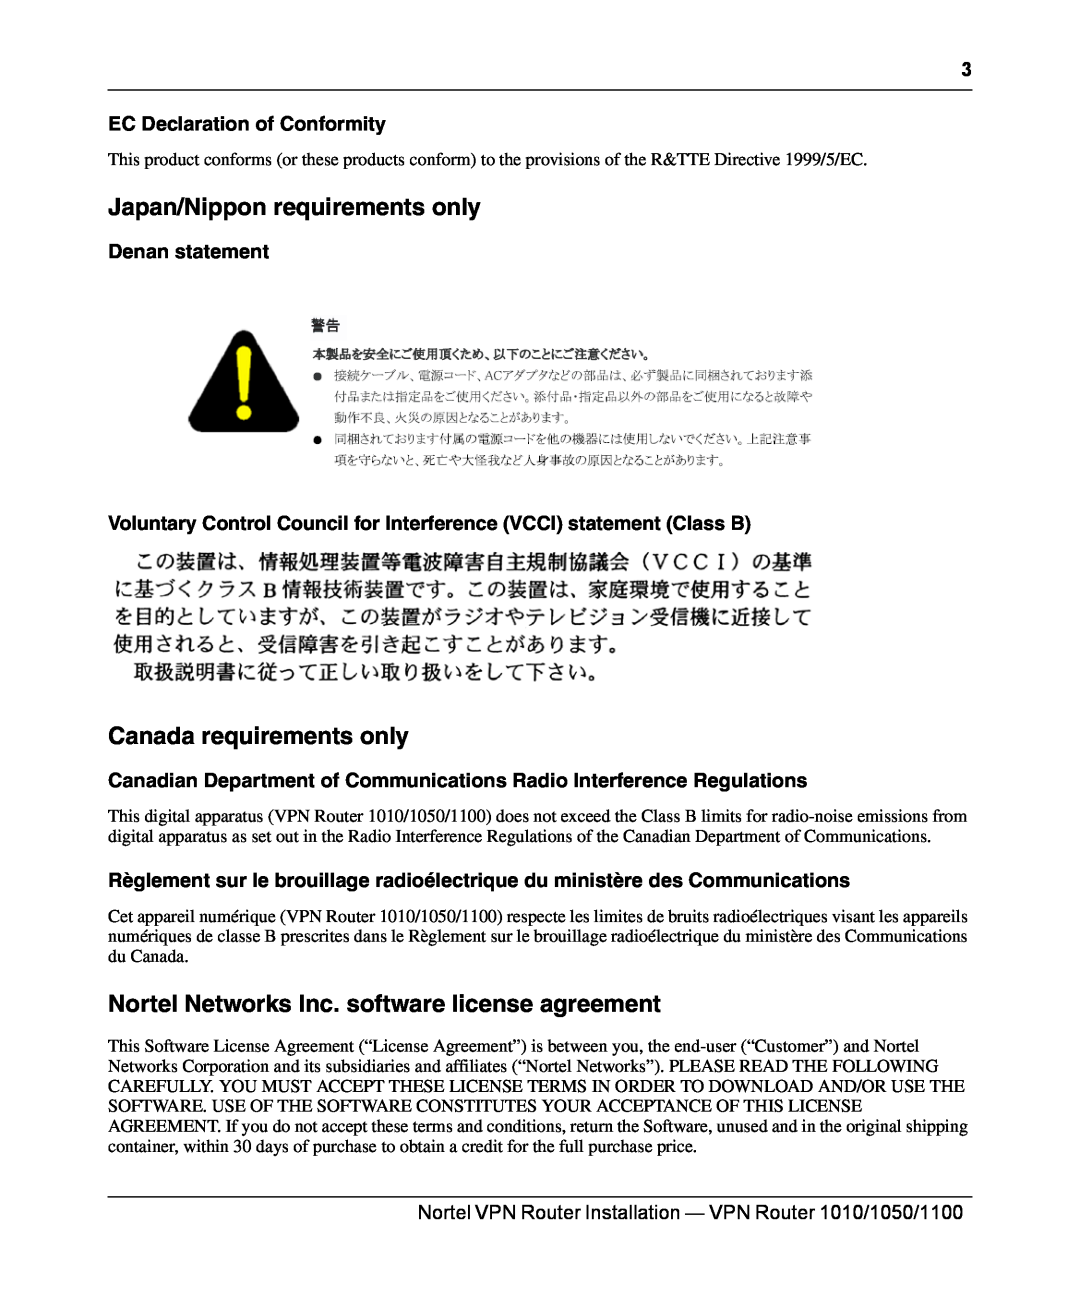 Nortel Networks 1050, 1100, 1010 Japan/Nippon requirements only, Canada requirements only, EC Declaration of Conformity 